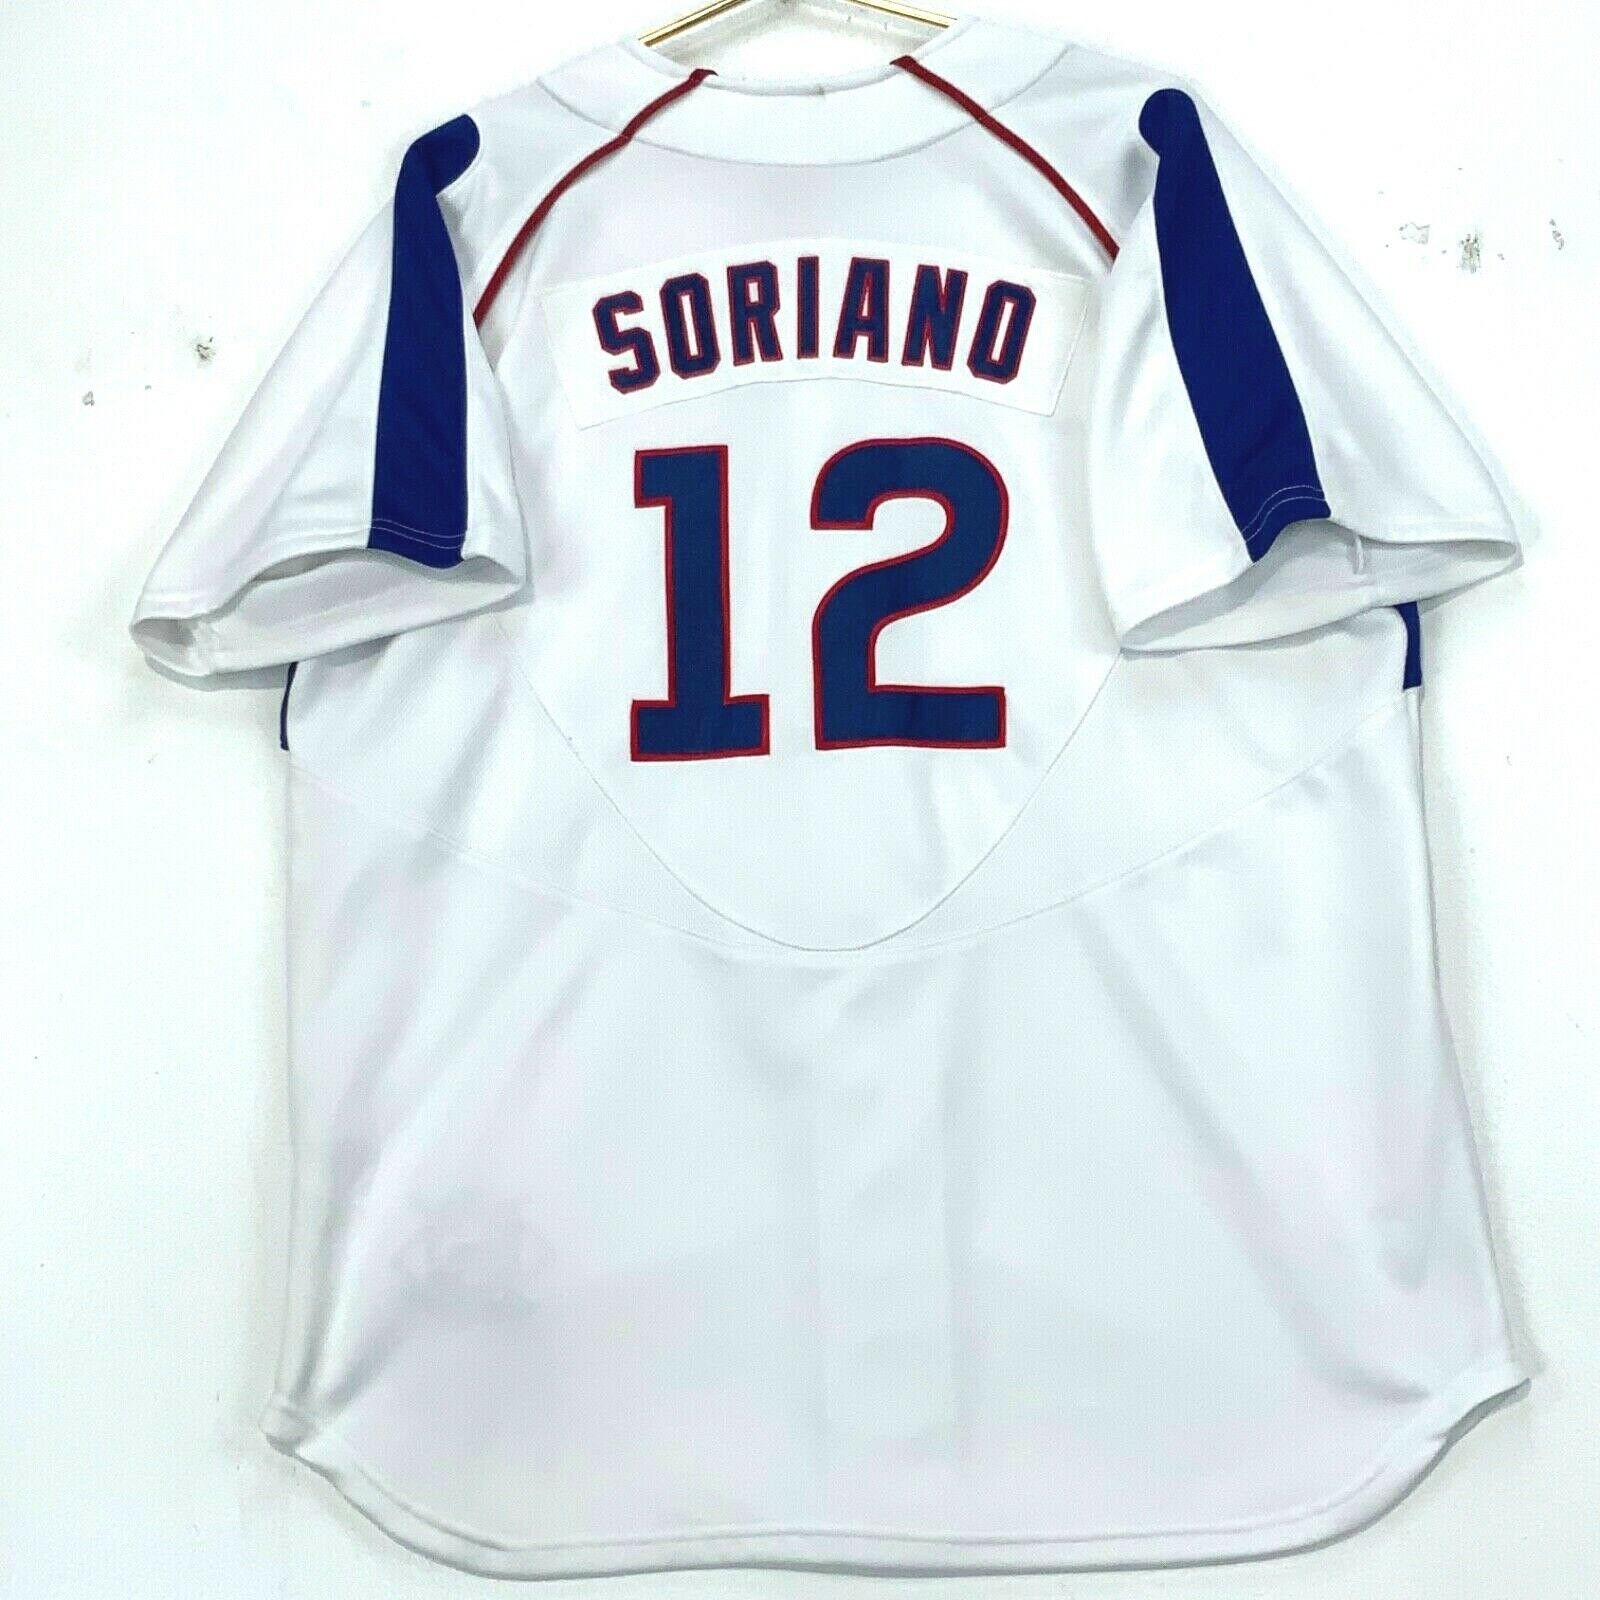 Alfonso Soriano 12 Nike Jersey Size Large White MLB -  Denmark